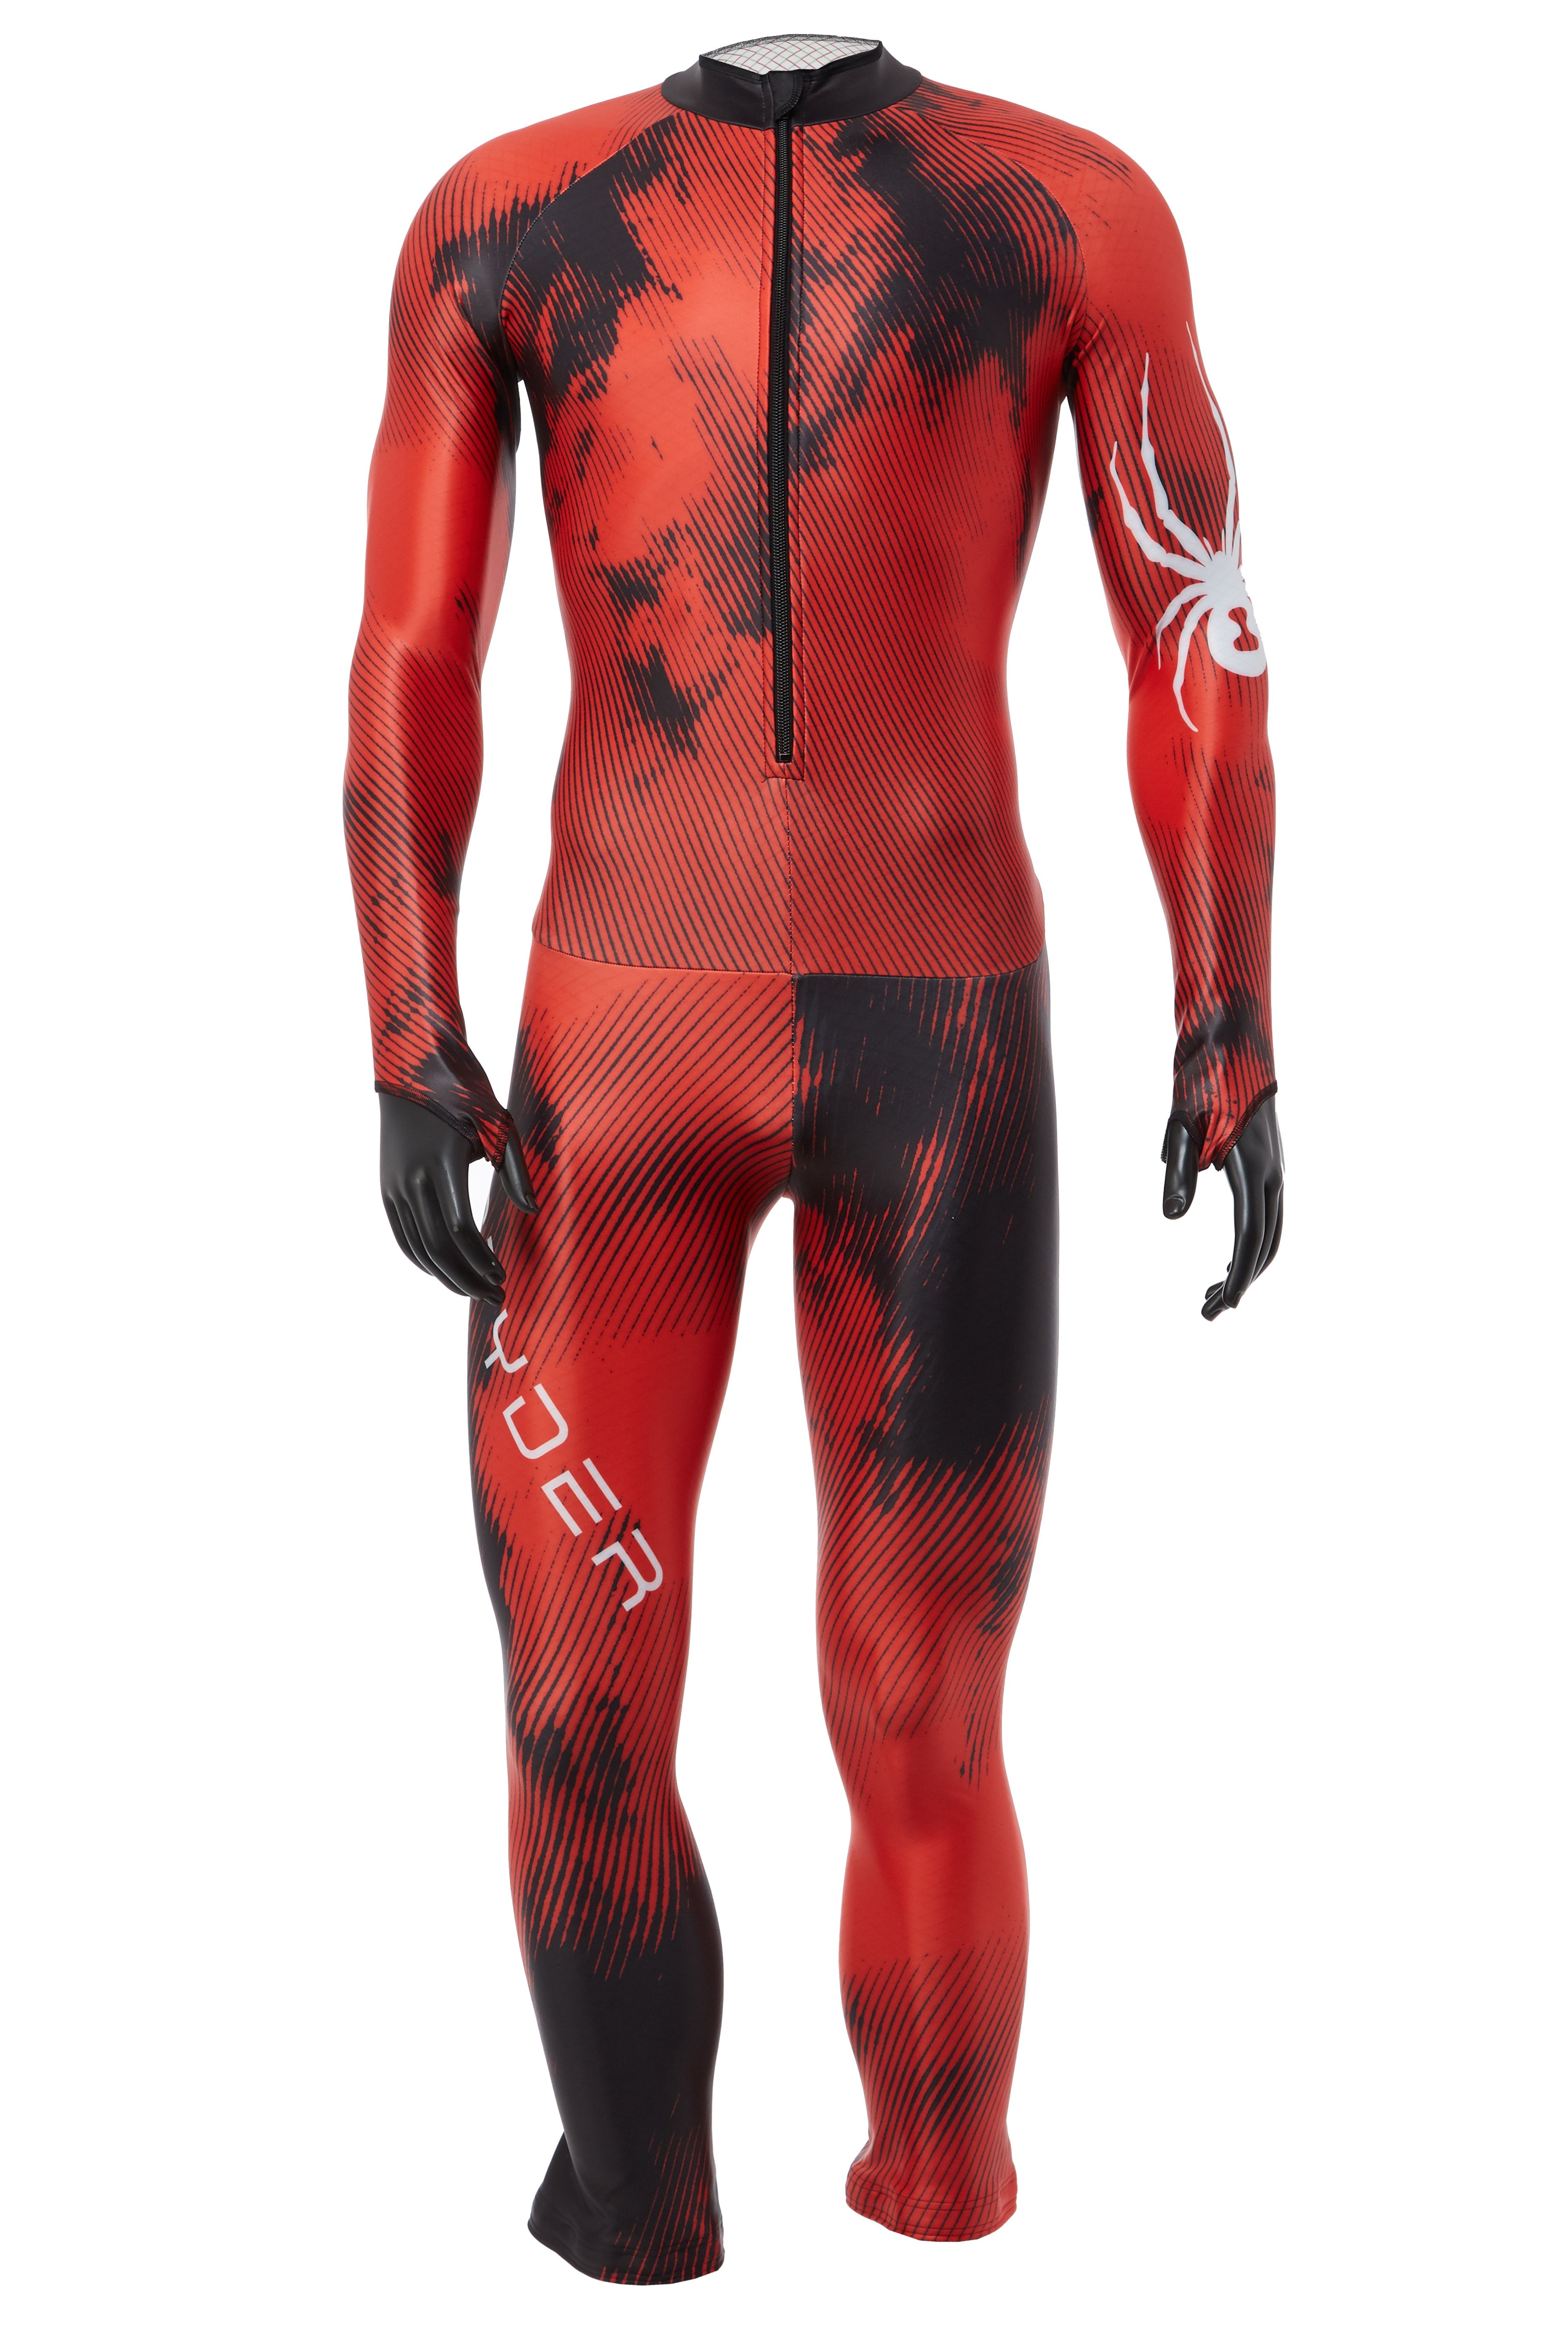 World Cup GS Ski Racing Suit - Volcano (Red) - Mens | Spyder